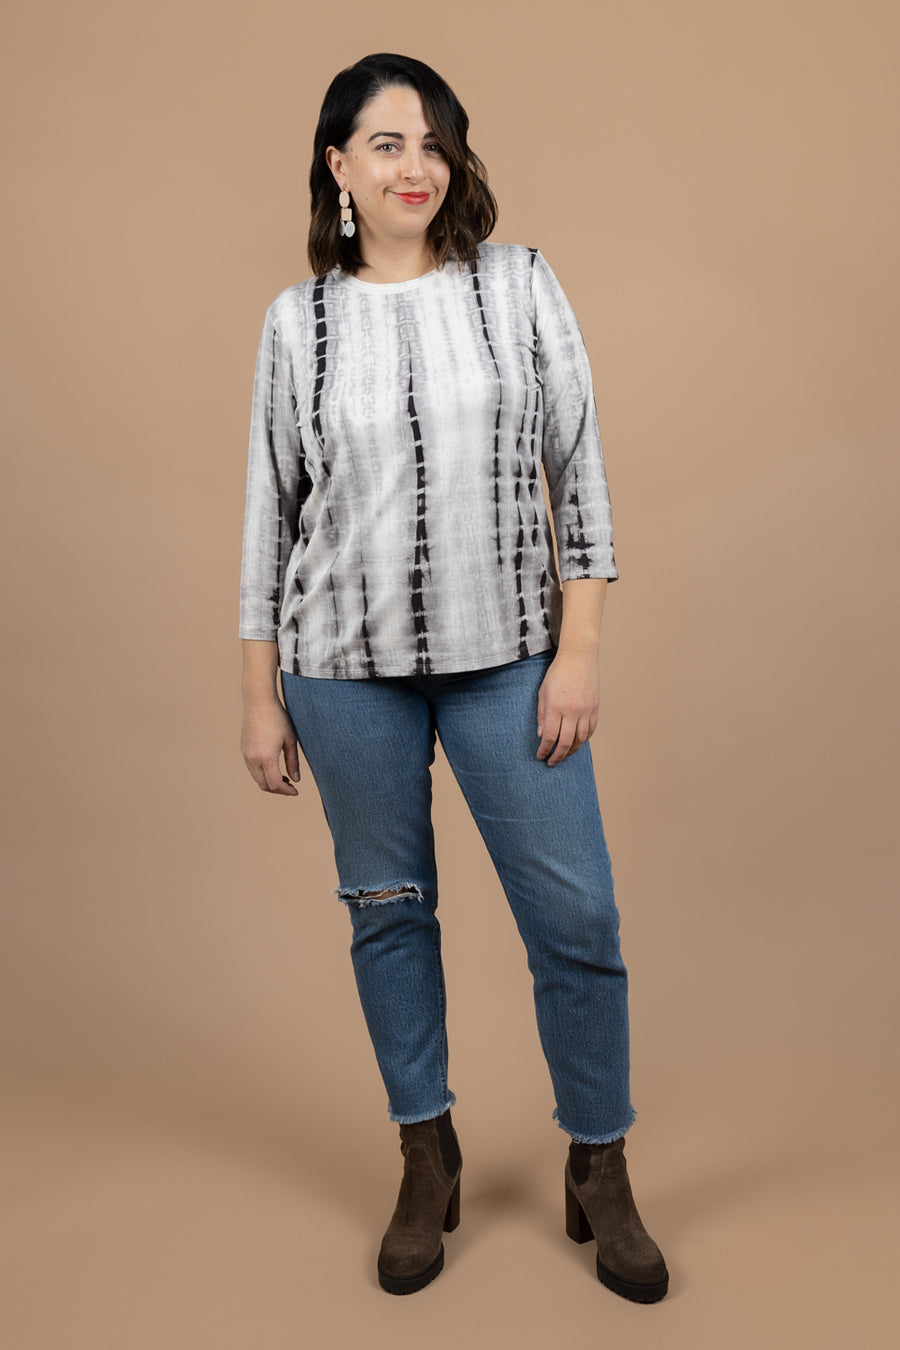 Buy V Neck Blouse Pdf Sewing Pattern, 3/4 Sleeve Blouse Digital Pattern,  Women Shirt, Blouse for Big Bust Women, Illustrated Instructions Online in  India 